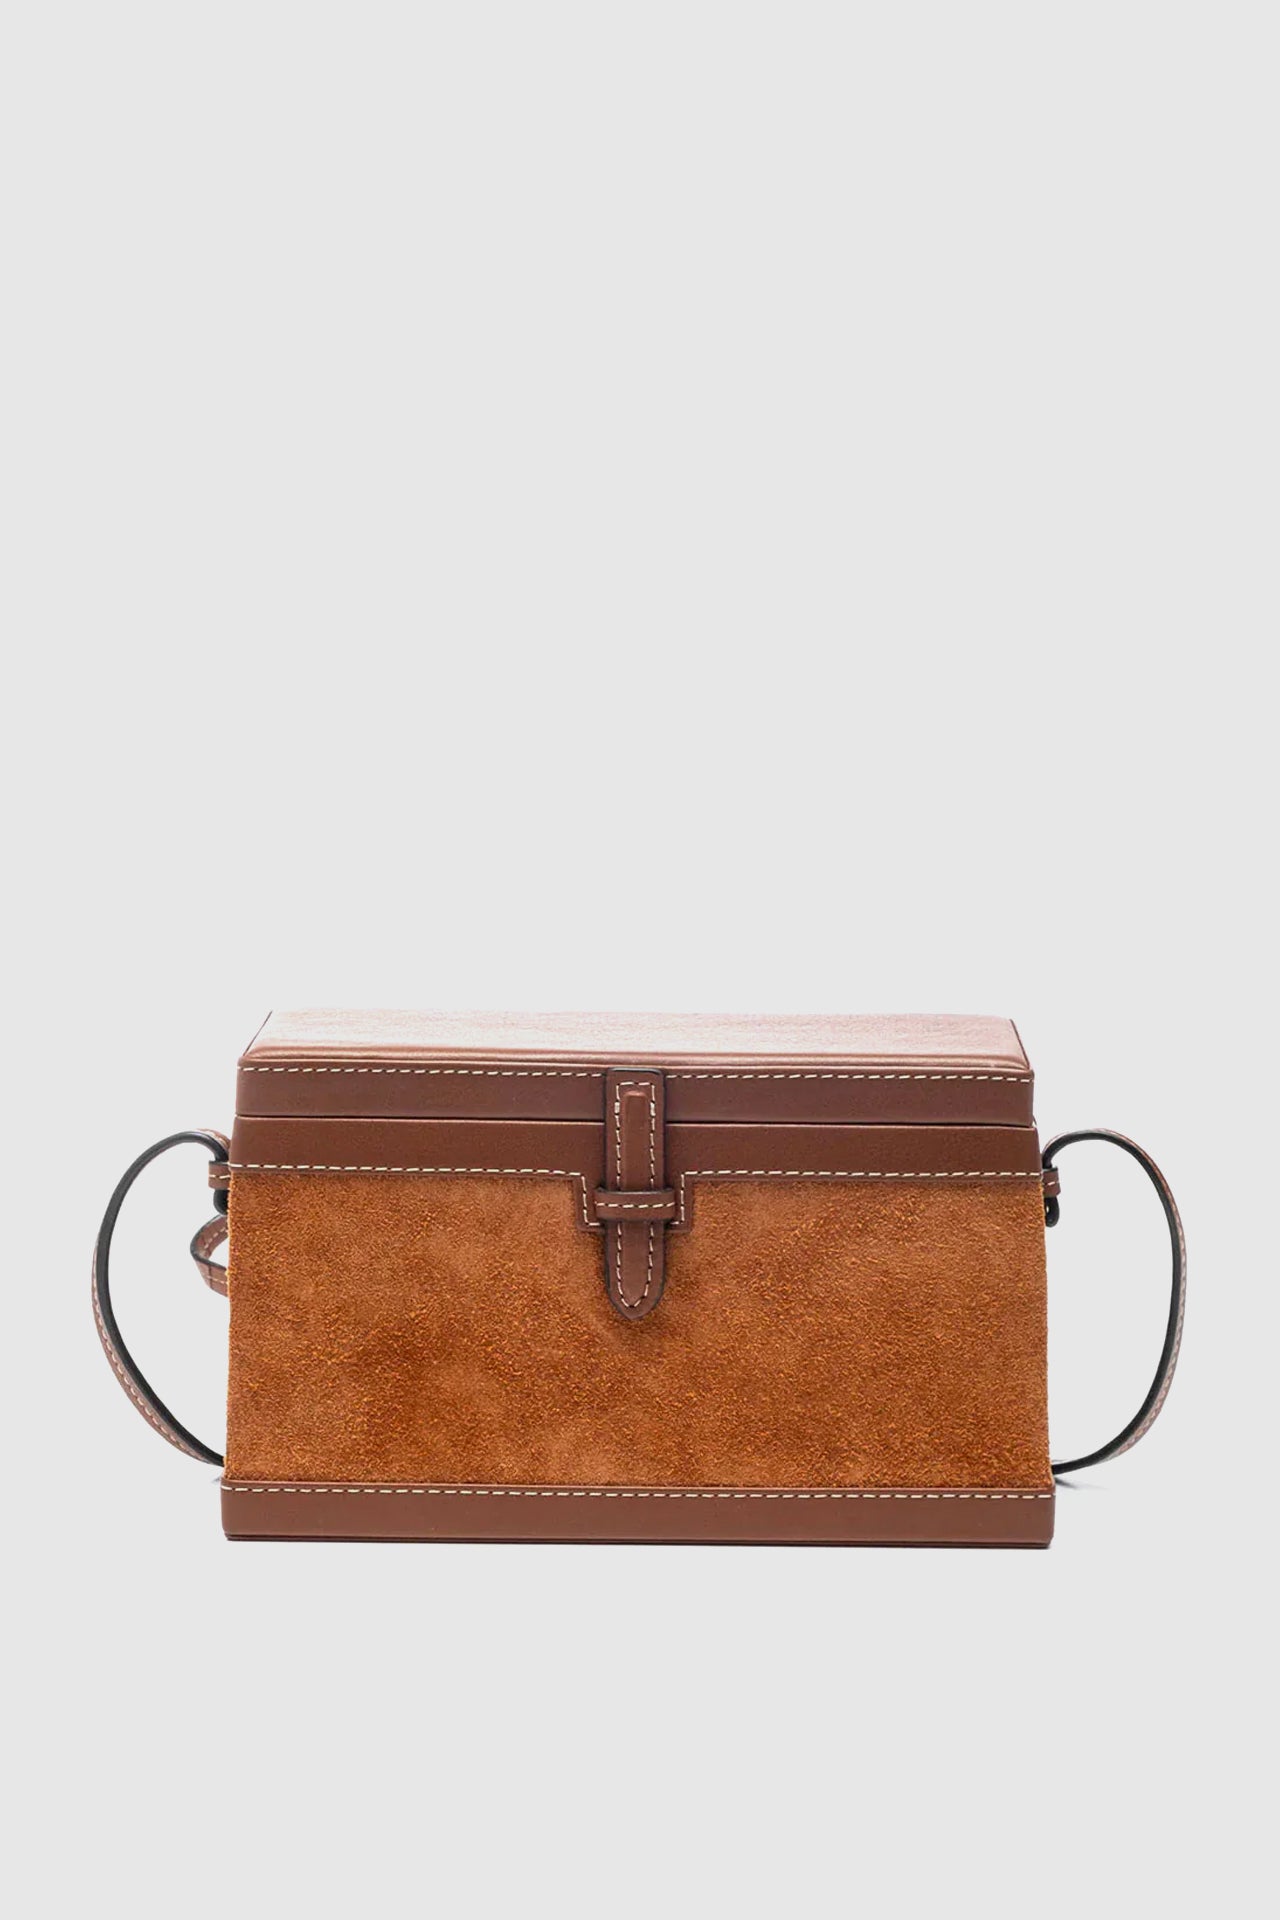 The Square Trunk in Suede